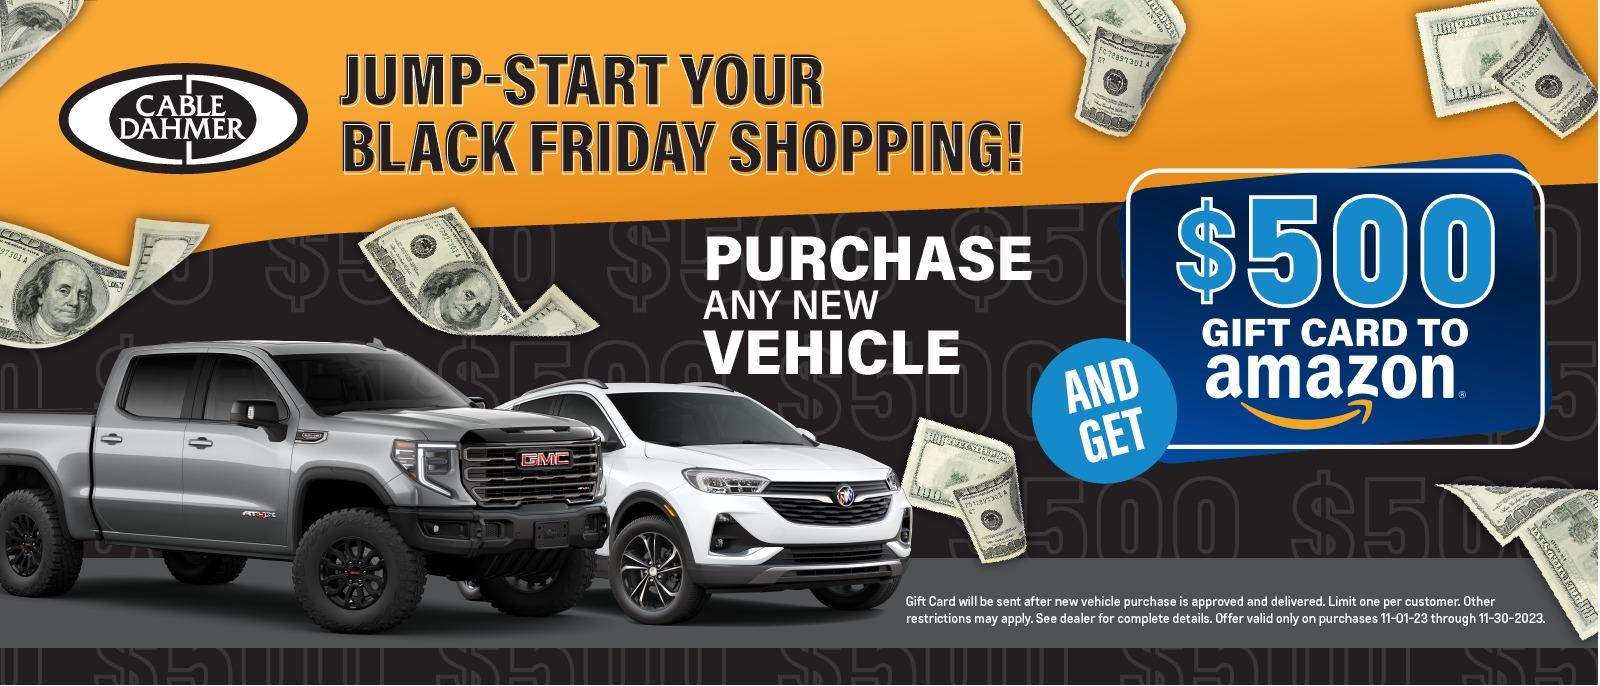 Free $500 Amazon gift card with purchase of any new vehicle.